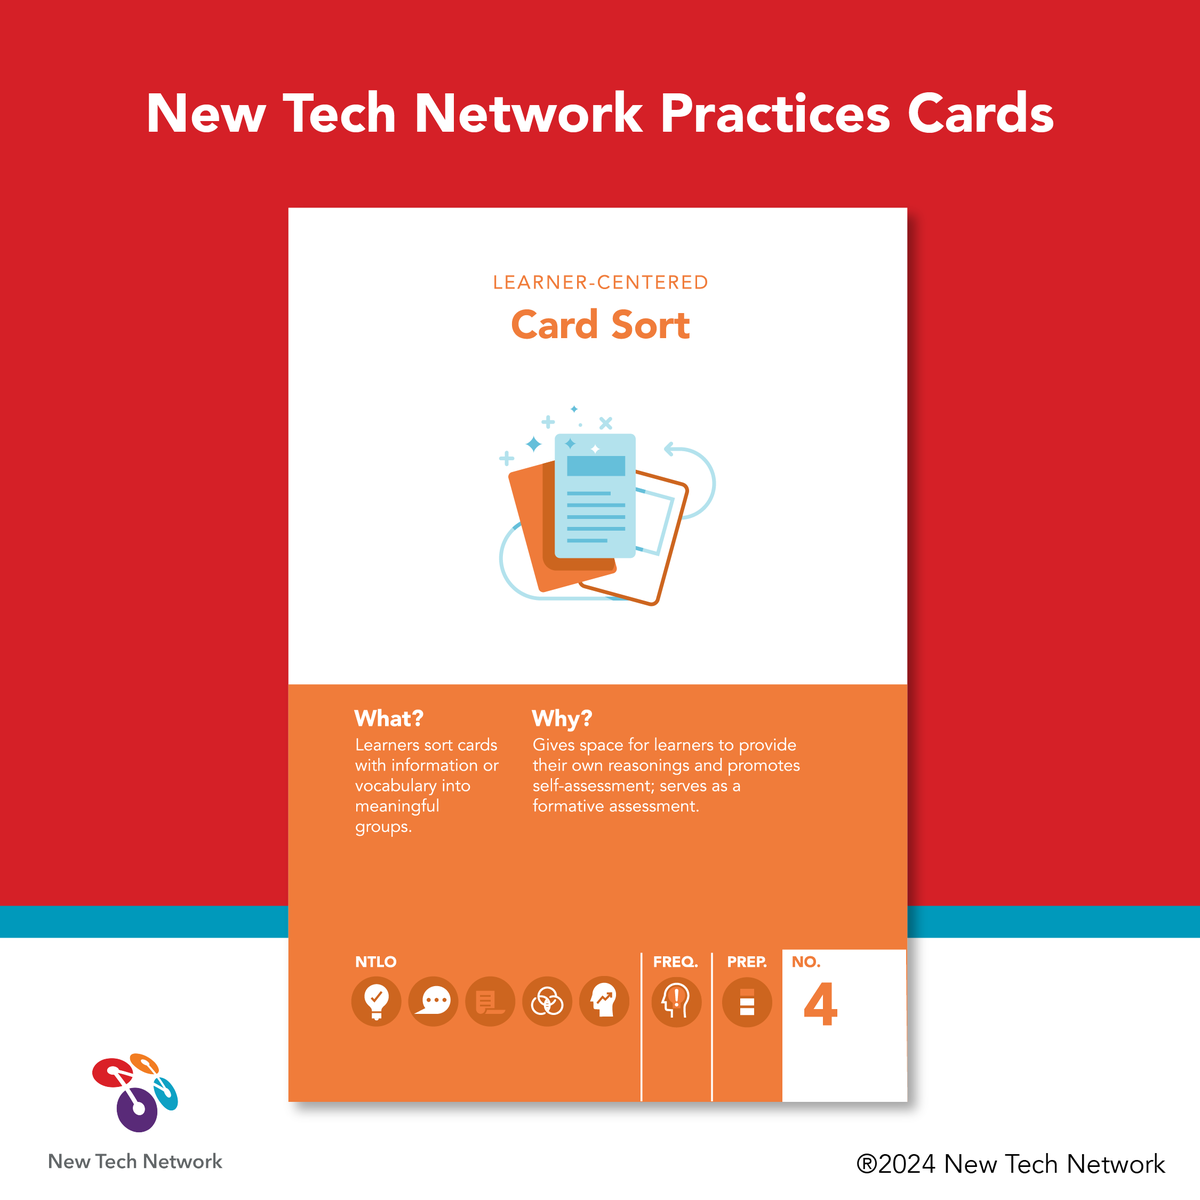 Calling all secondary teachers! Looking for one of the most versatile and user friendly Learner-Centered Practices? Try out a card sort in your classroom and tell us how it goes! Check out this video from Teacher Toolkit to see this practice in action. youtube.com/watch?v=jOvXj7…